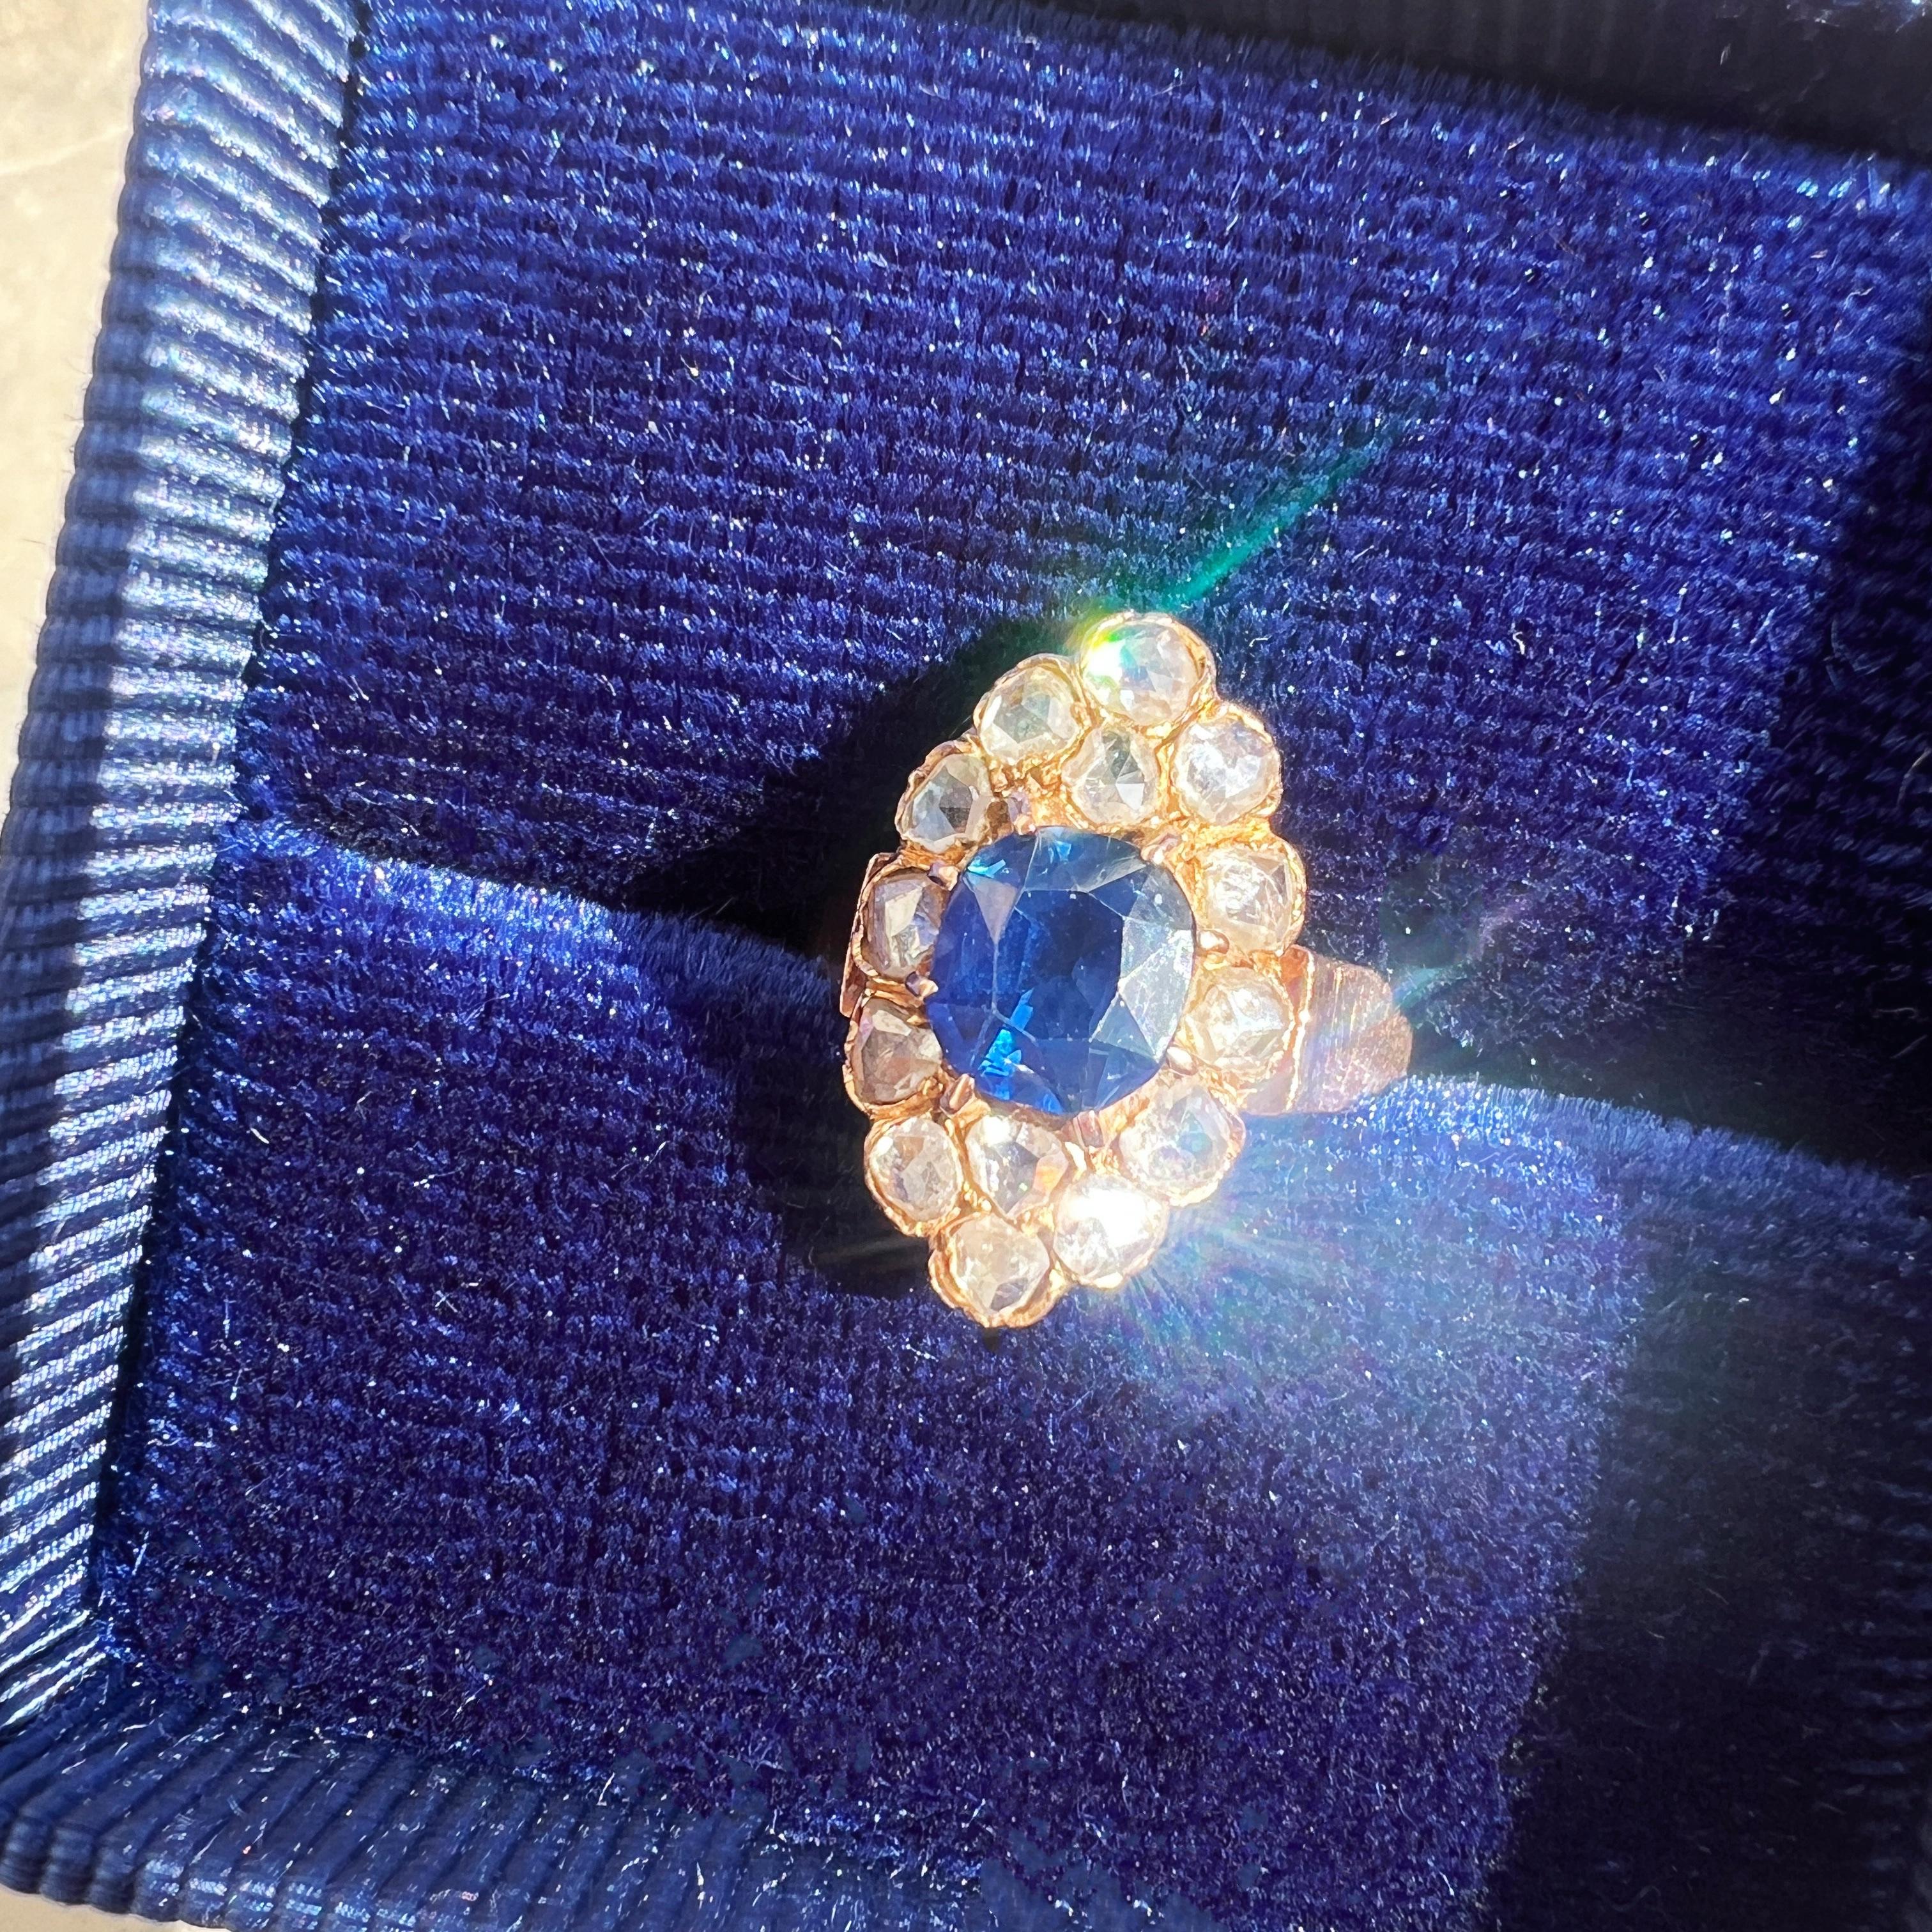 For sale a Victorian era 18K gold, LFG certified natural unheated blue sapphire diamond ring.

At the heart of the ring is a breathtaking old cushion-cut blue sapphire that steals the spotlight. The sapphire's well-saturated royal blue color is